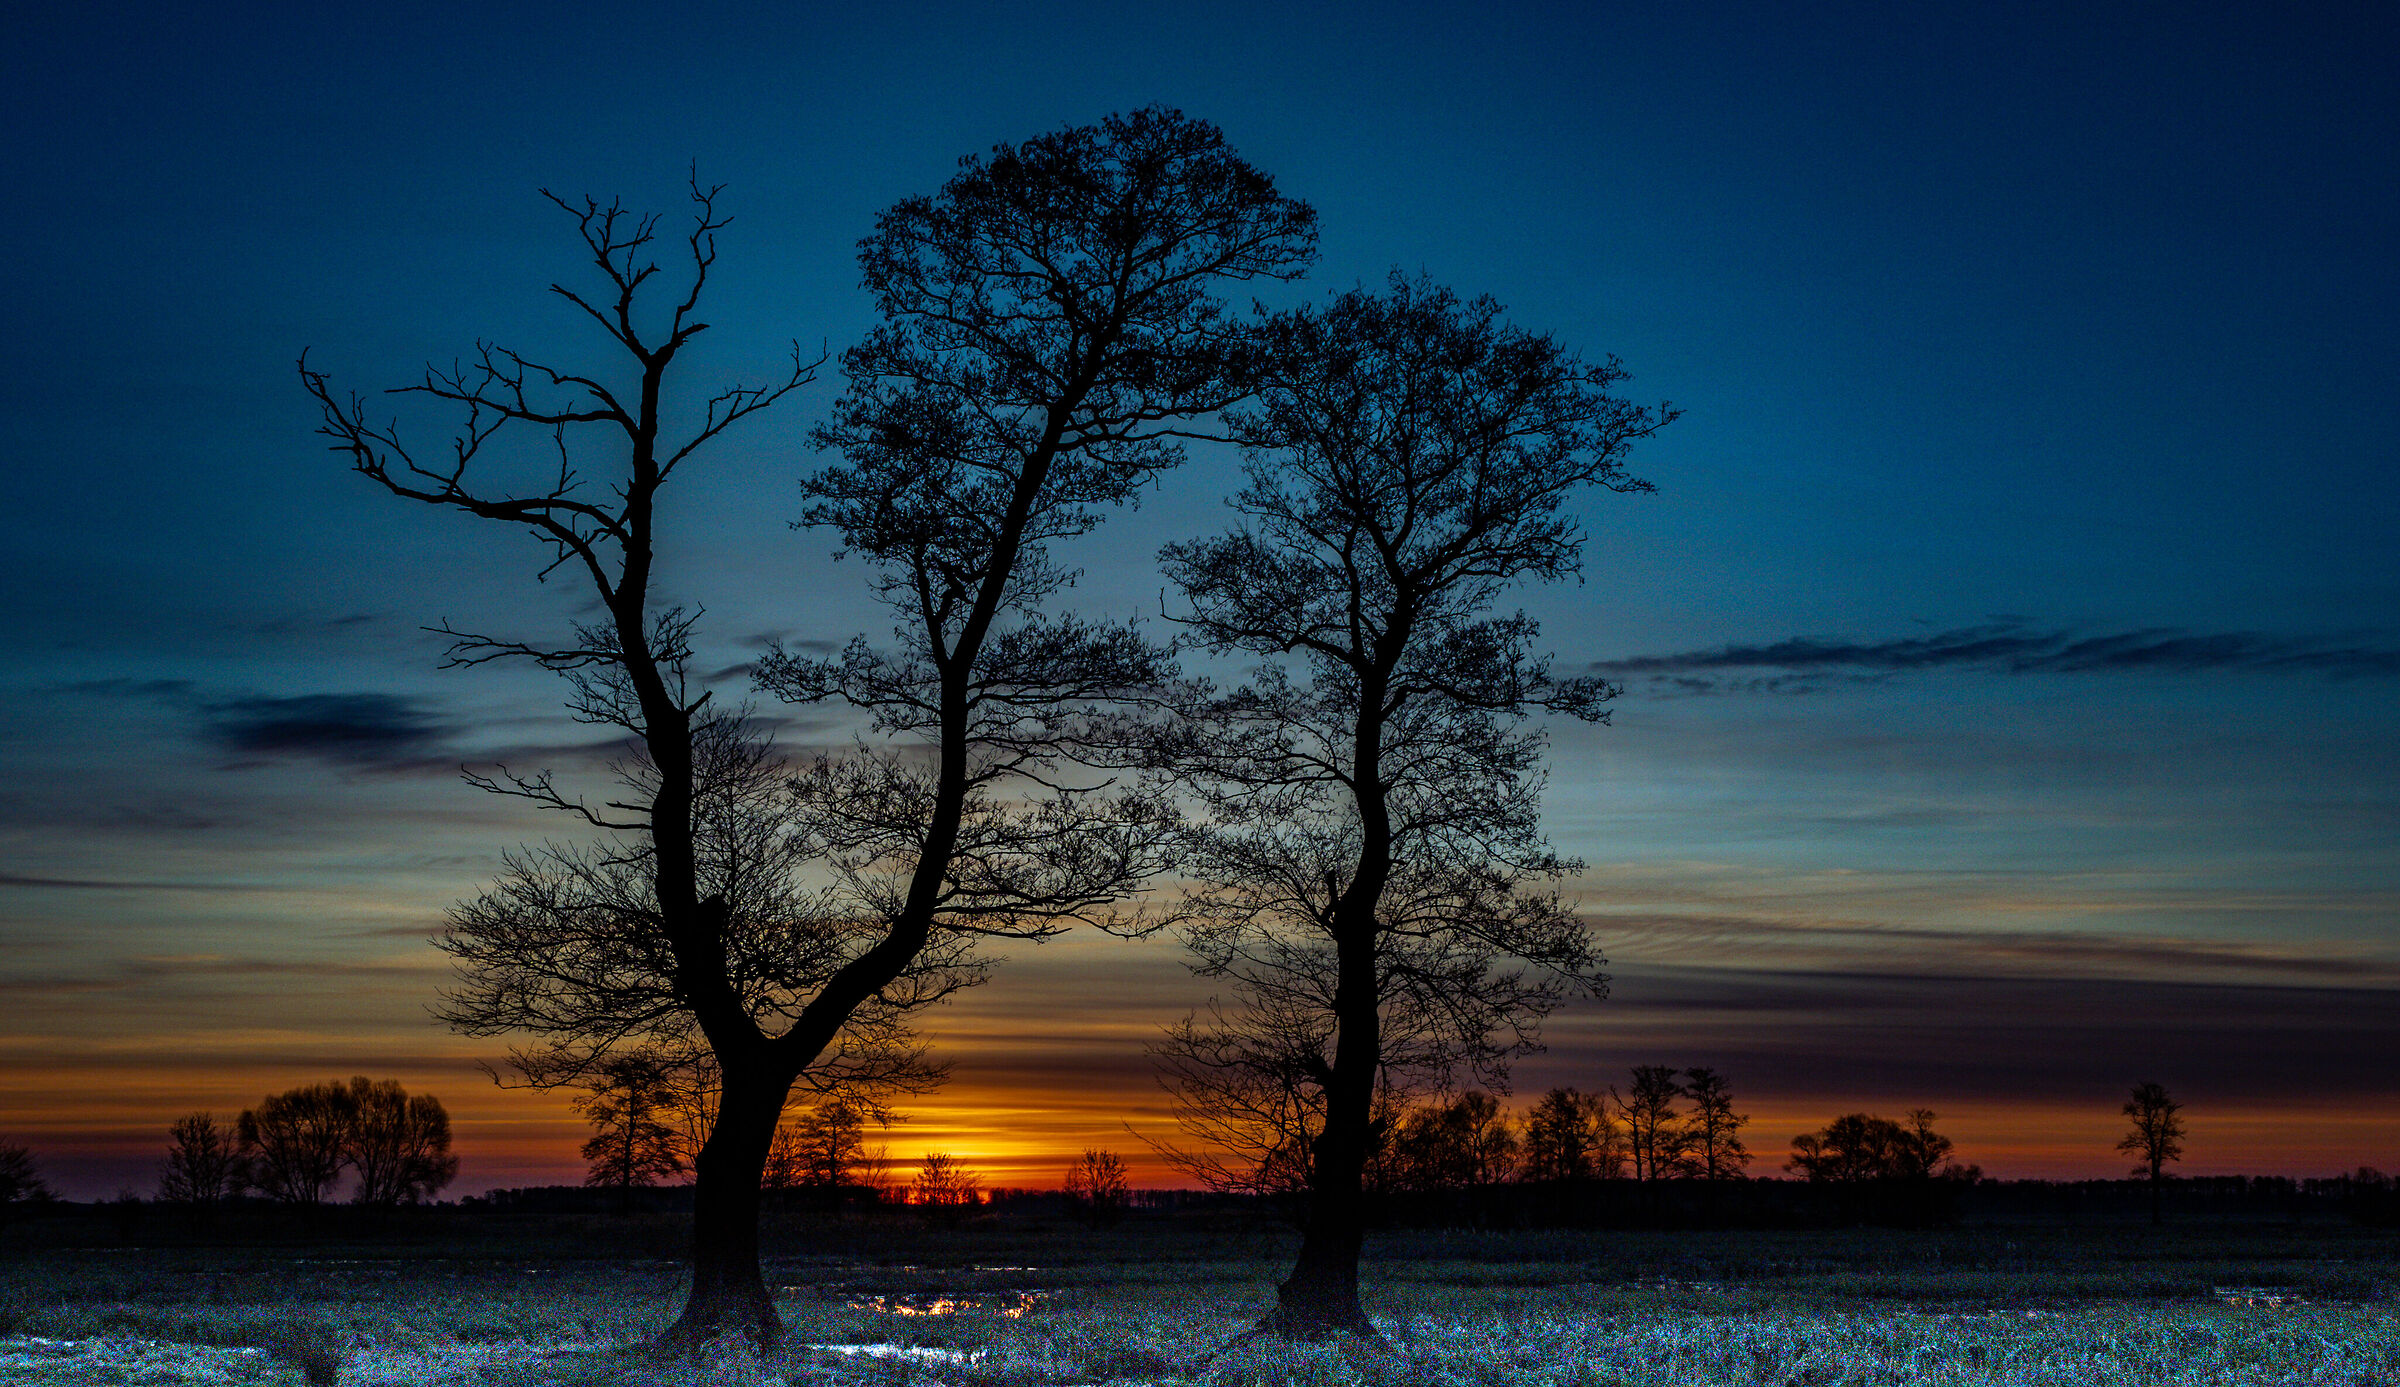 Two trees against the background of the rising sun...